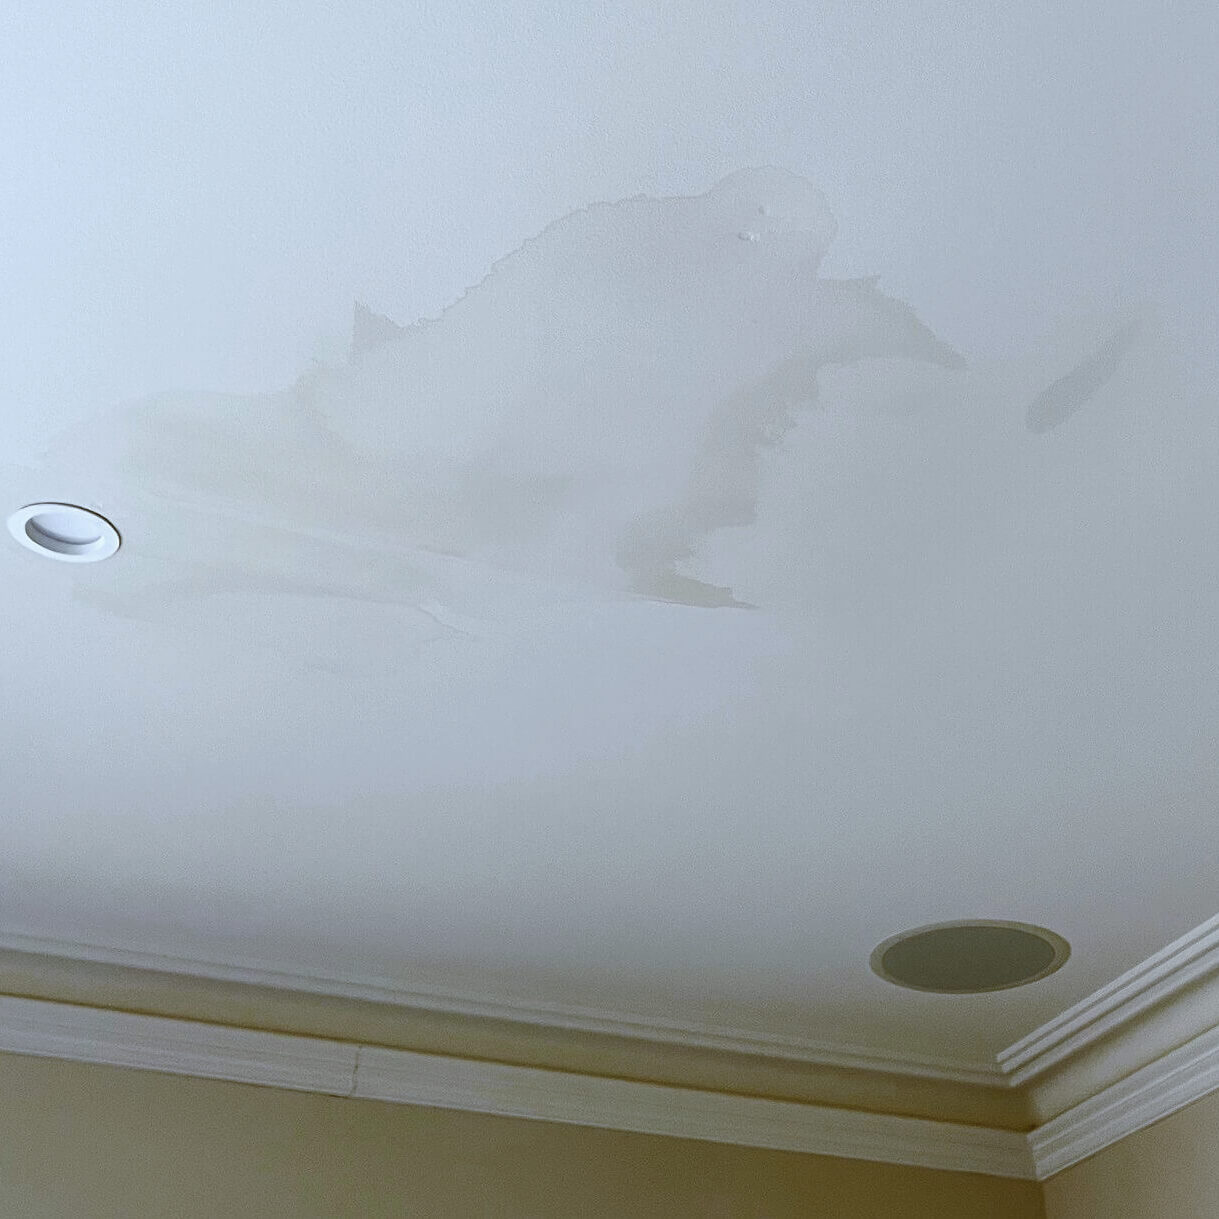 Stained ceiling from leaking water